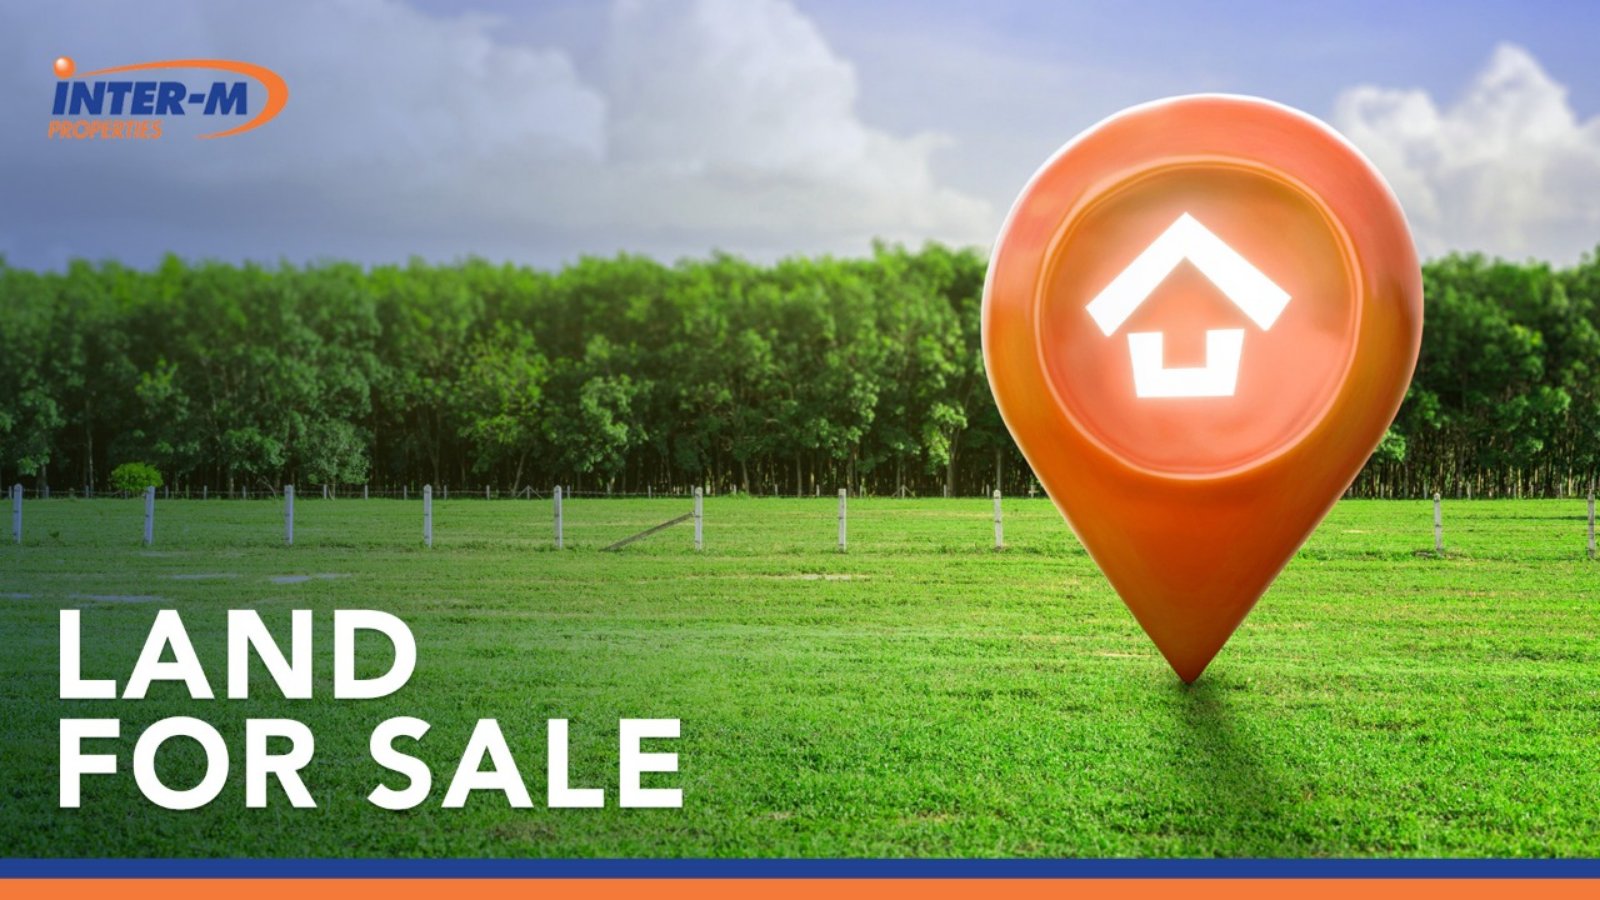 Residential Land For Sale In Moni (825 sq.m)